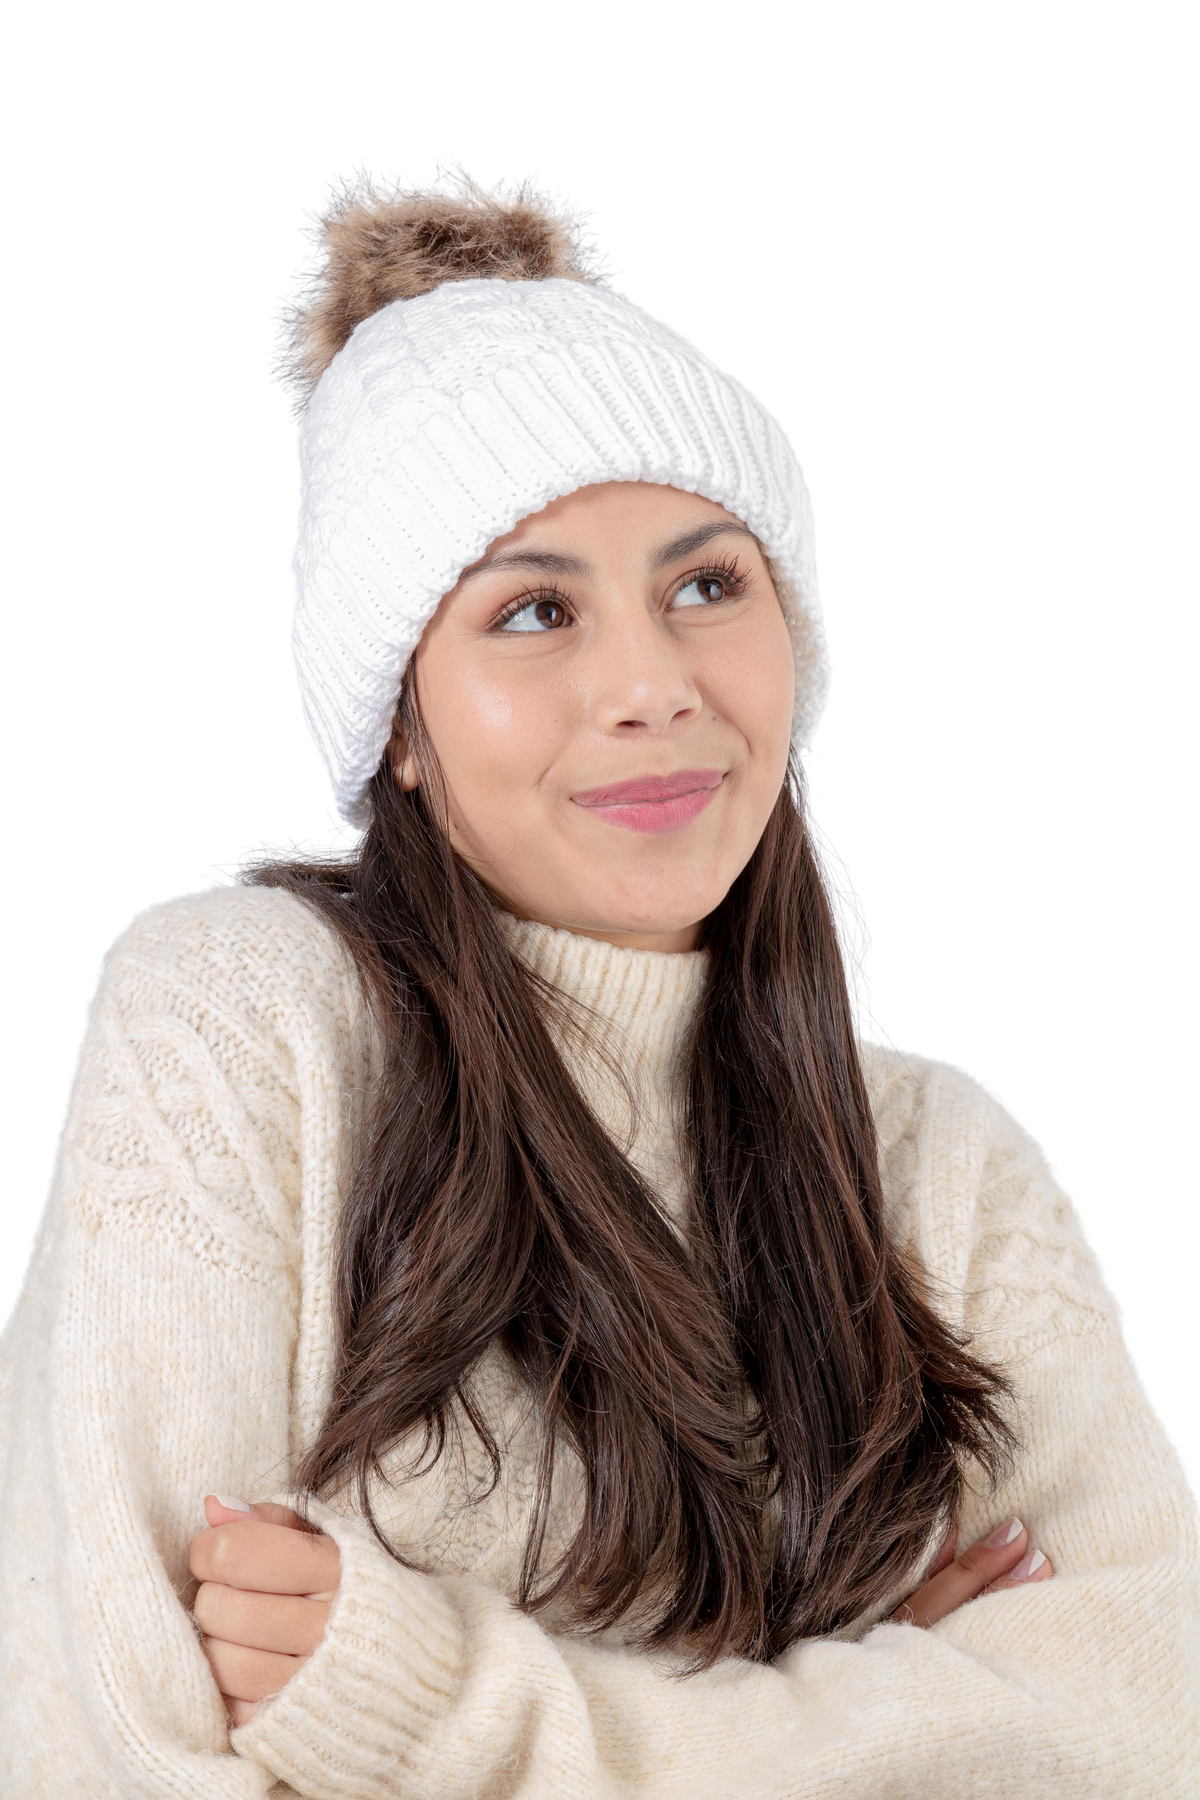 Just Cozy Knit Hats - Comfy and Cozy Lined